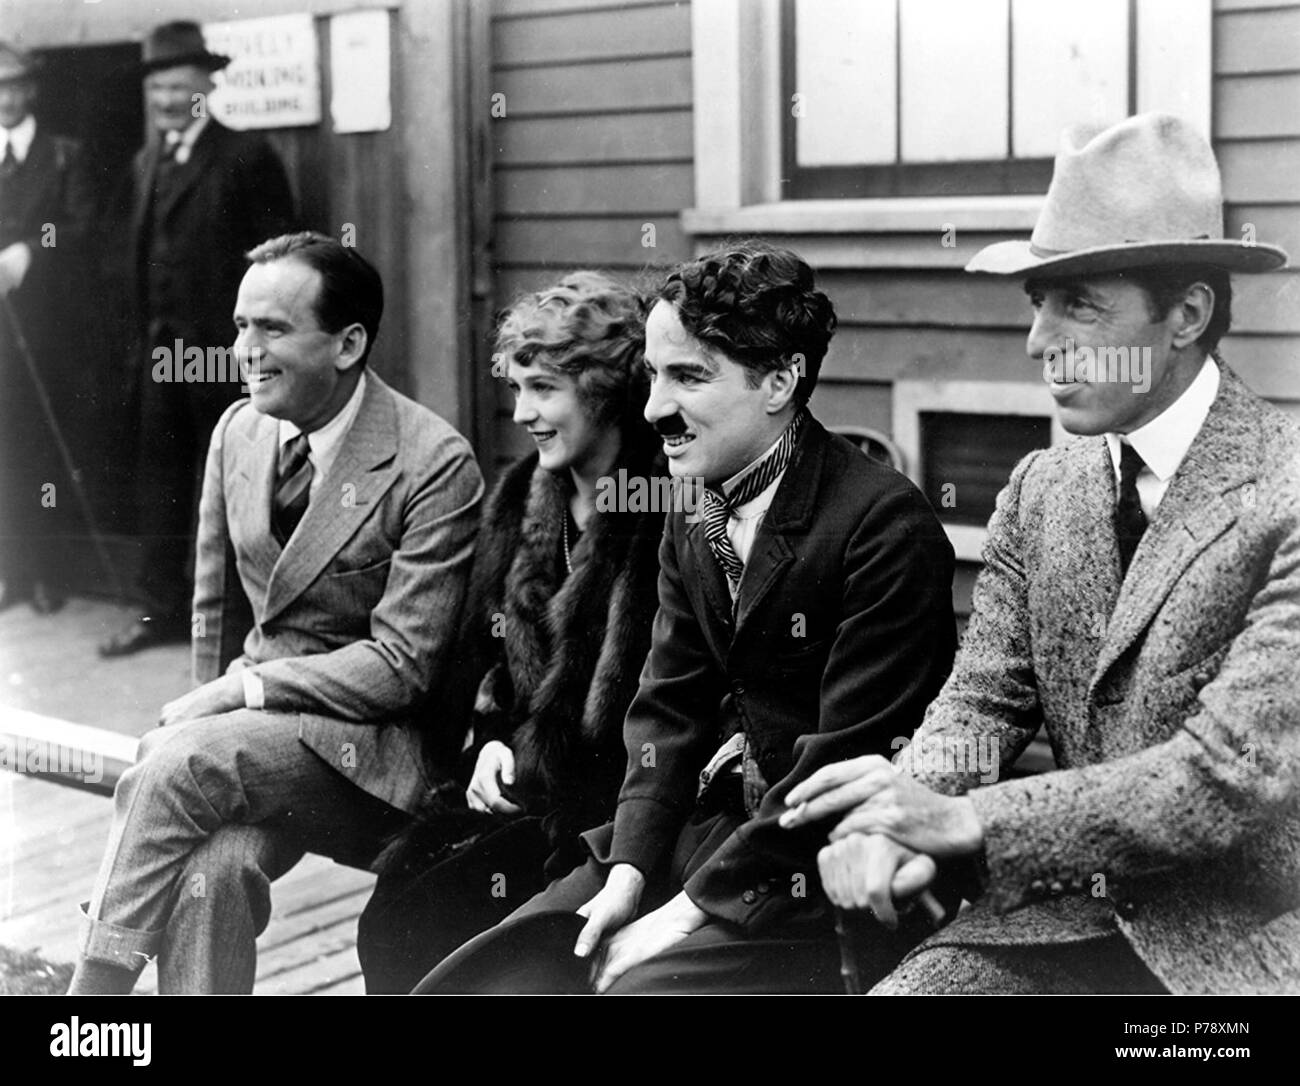 English: United Artists Corporation stockholders Douglas Fairbanks, Mary Pickford, Charlie Chaplin and D.W. Griffith in 1919. Français : les actionnaires de United Artists Corporation Douglas Fairbanks, Mary Pickford, Charlie Chaplin and D.W. Griffith en 1919. 1919 19 Fairbanks - Pickford - Chaplin - Griffith Stock Photo